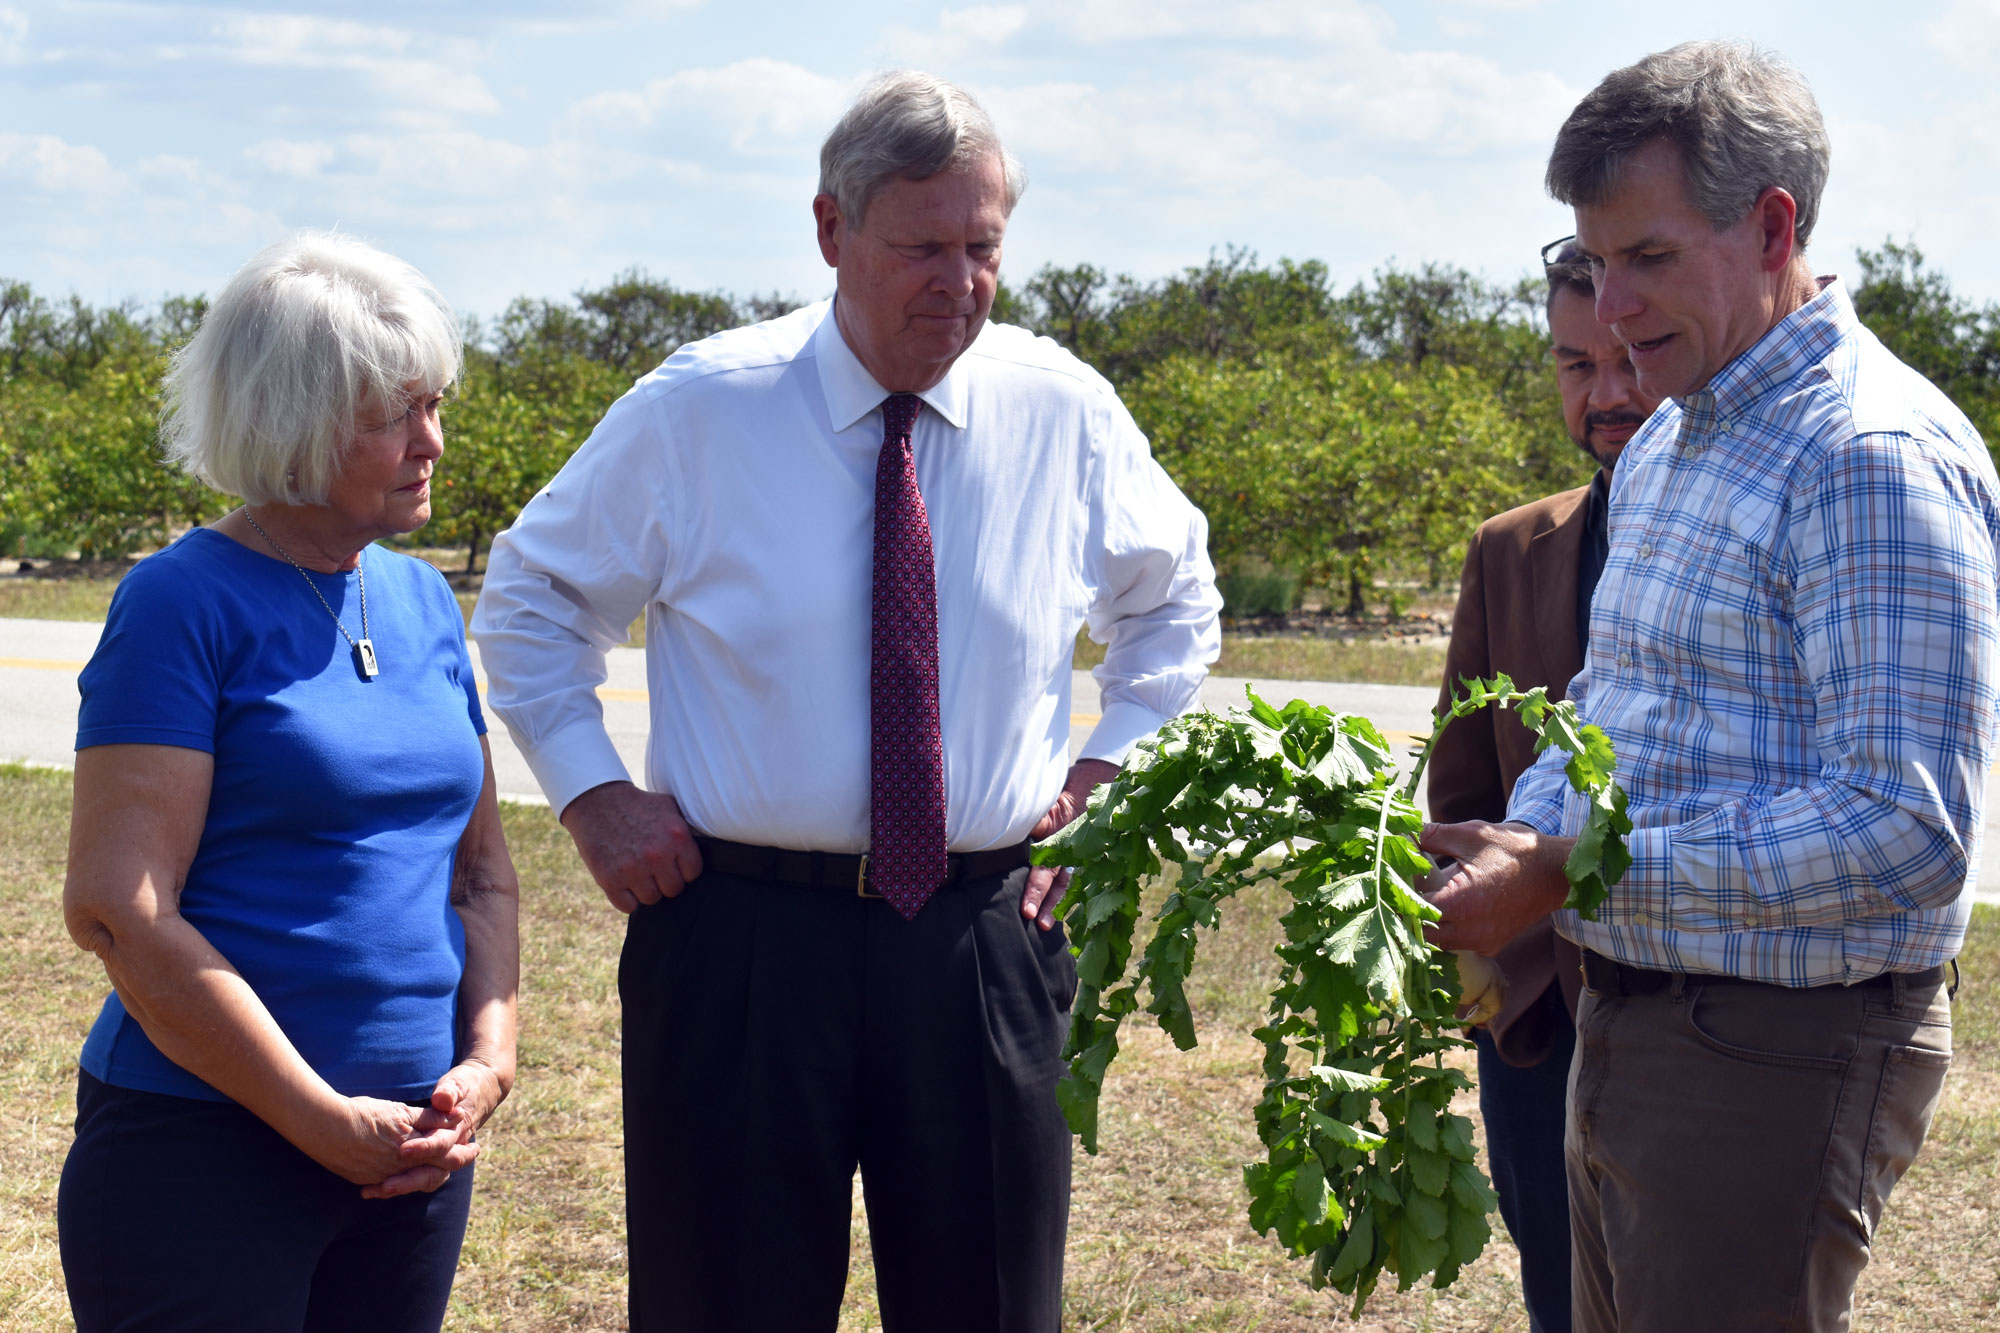 Agriculture Secretary Tom Vilsack with producers in Florida